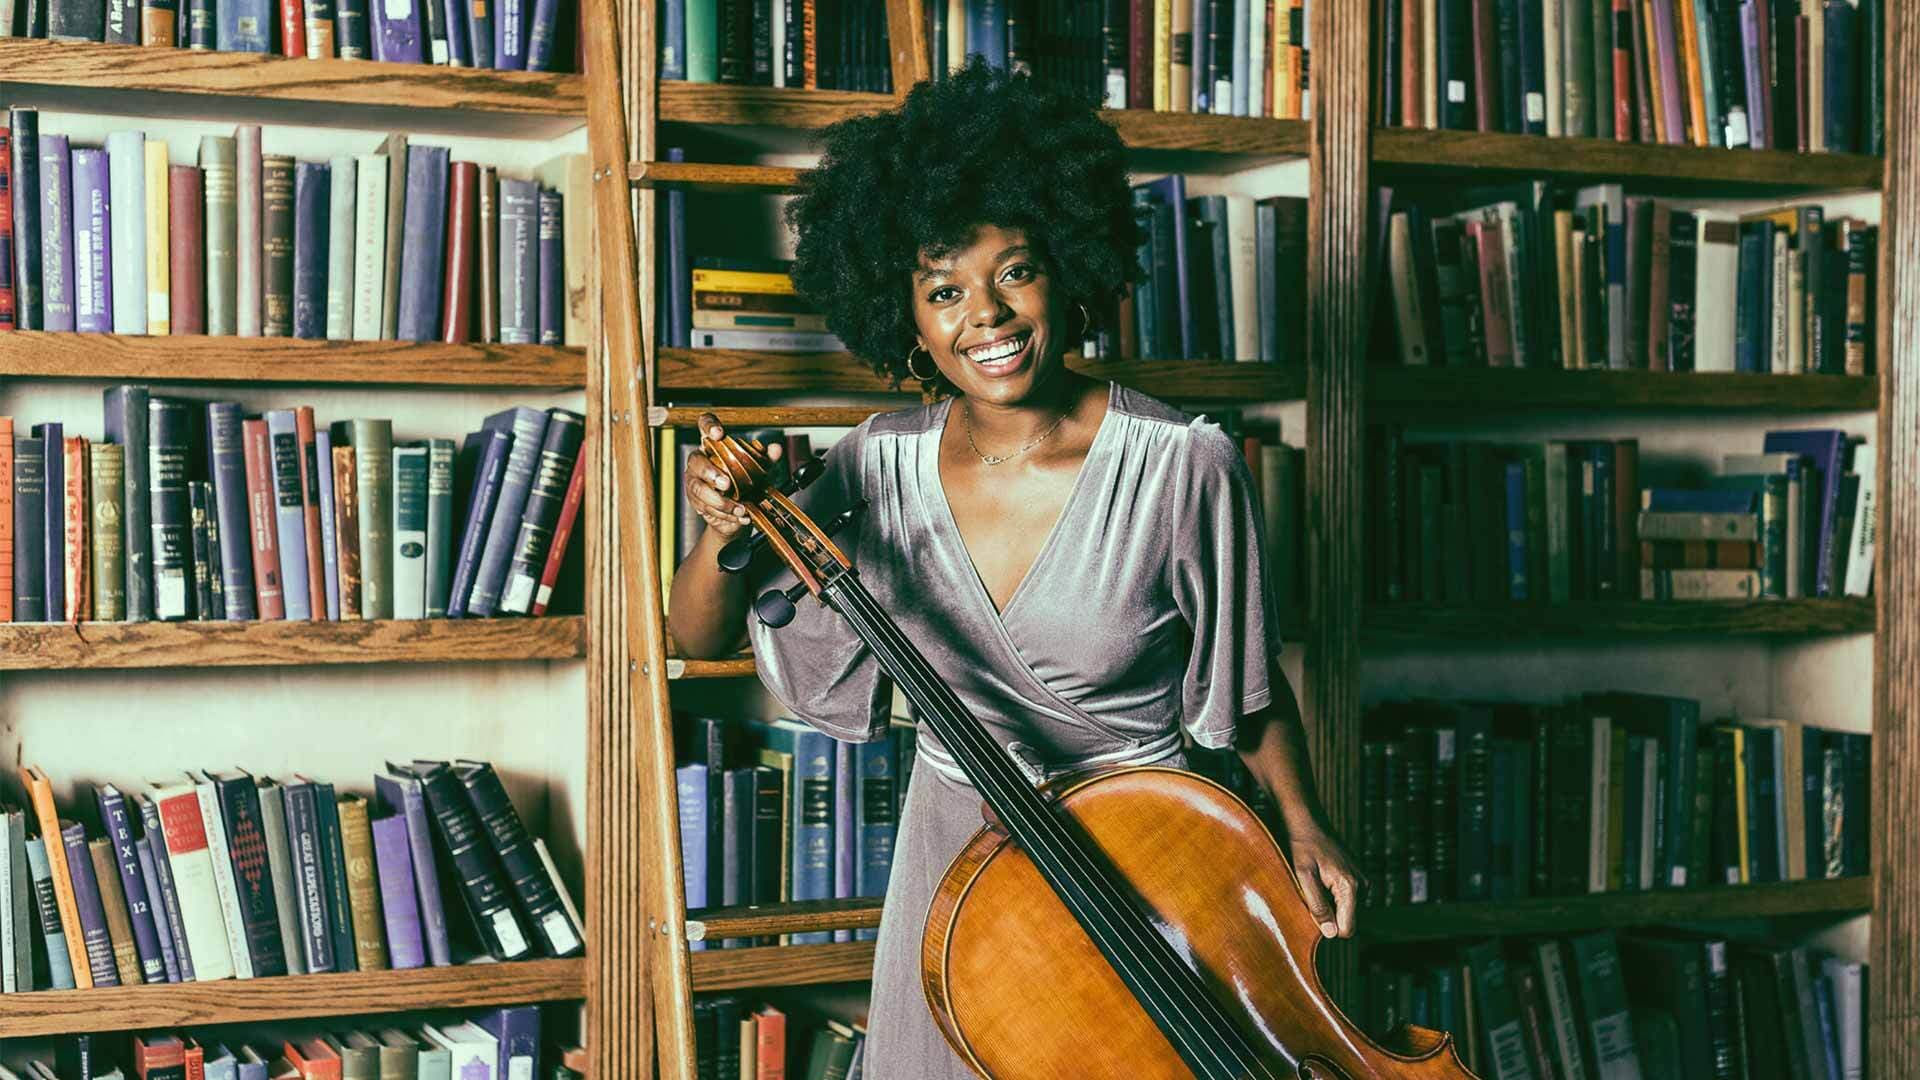 Titilayo Ayangade poses with her cello